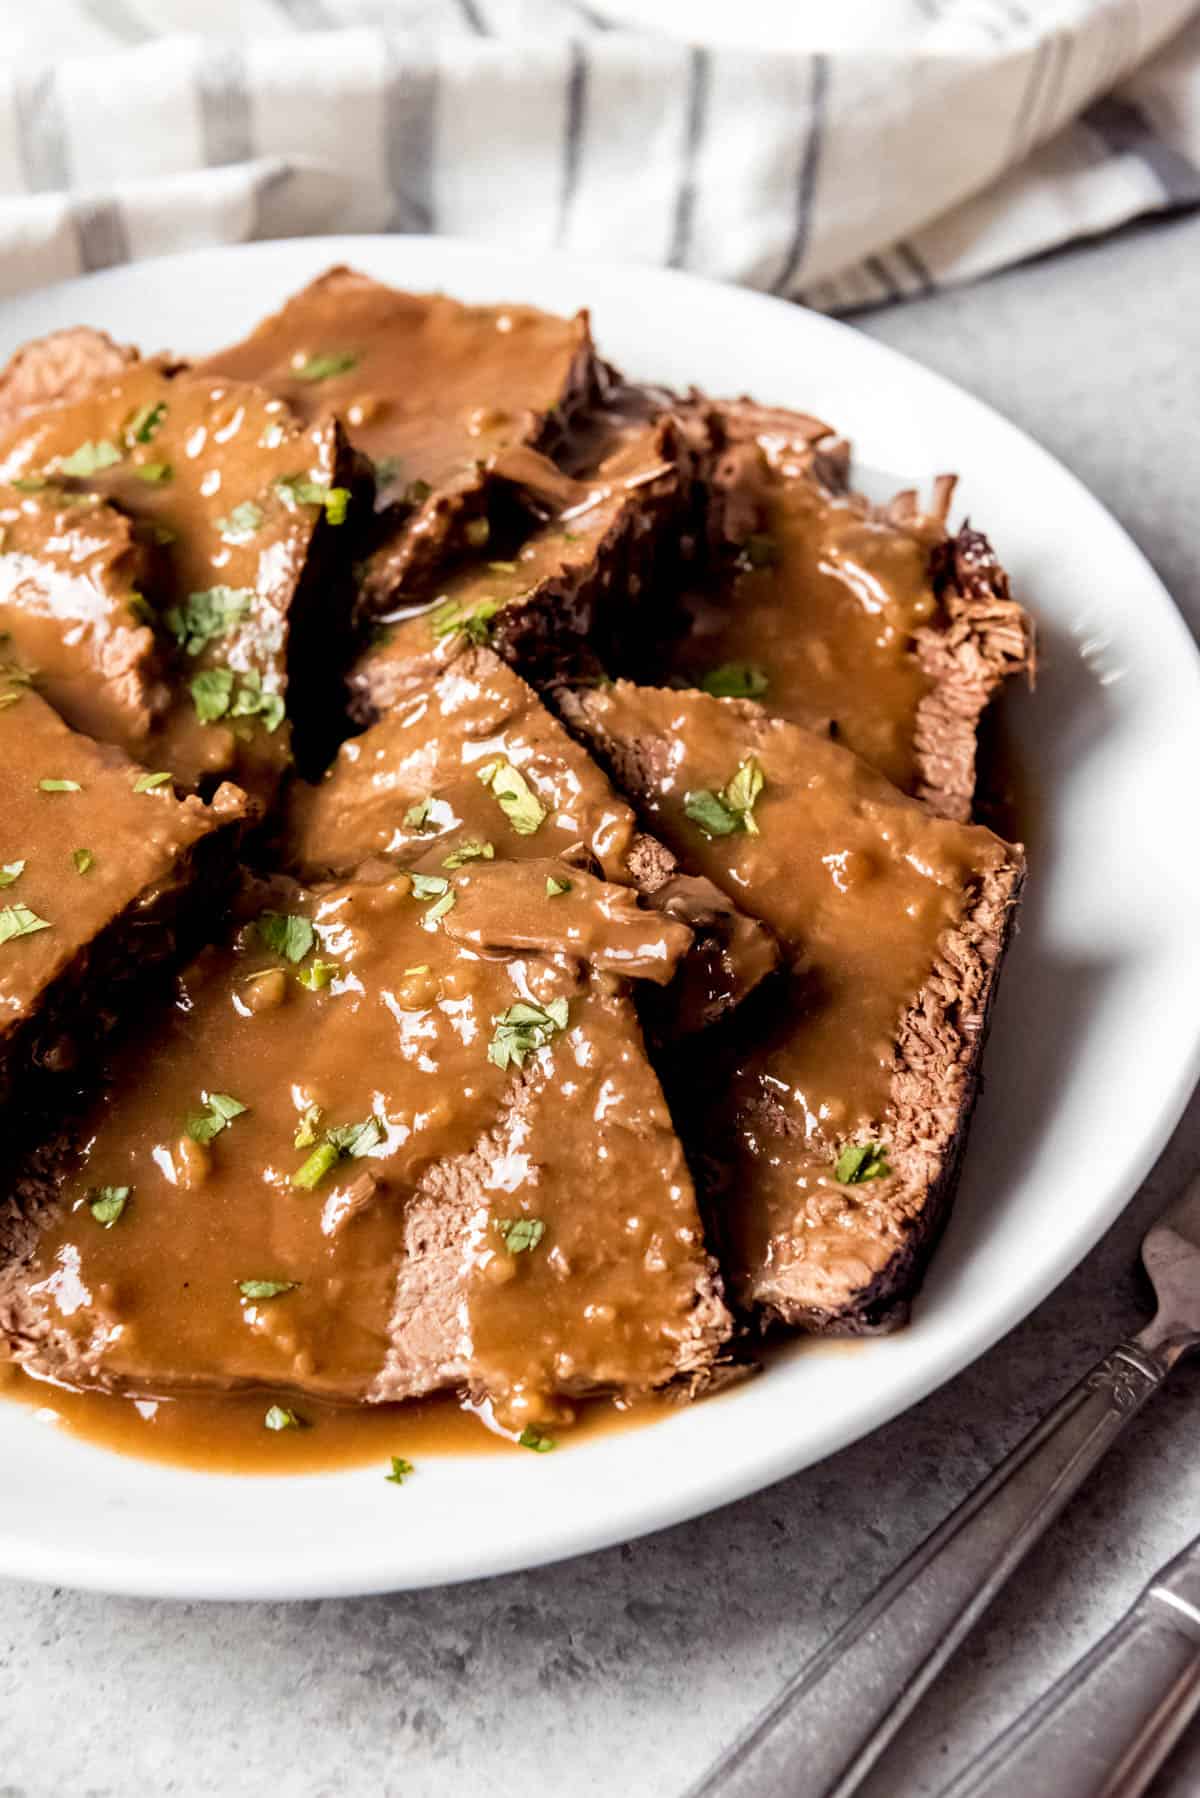 An image of sliced sauerbraten with gravy on a plate.